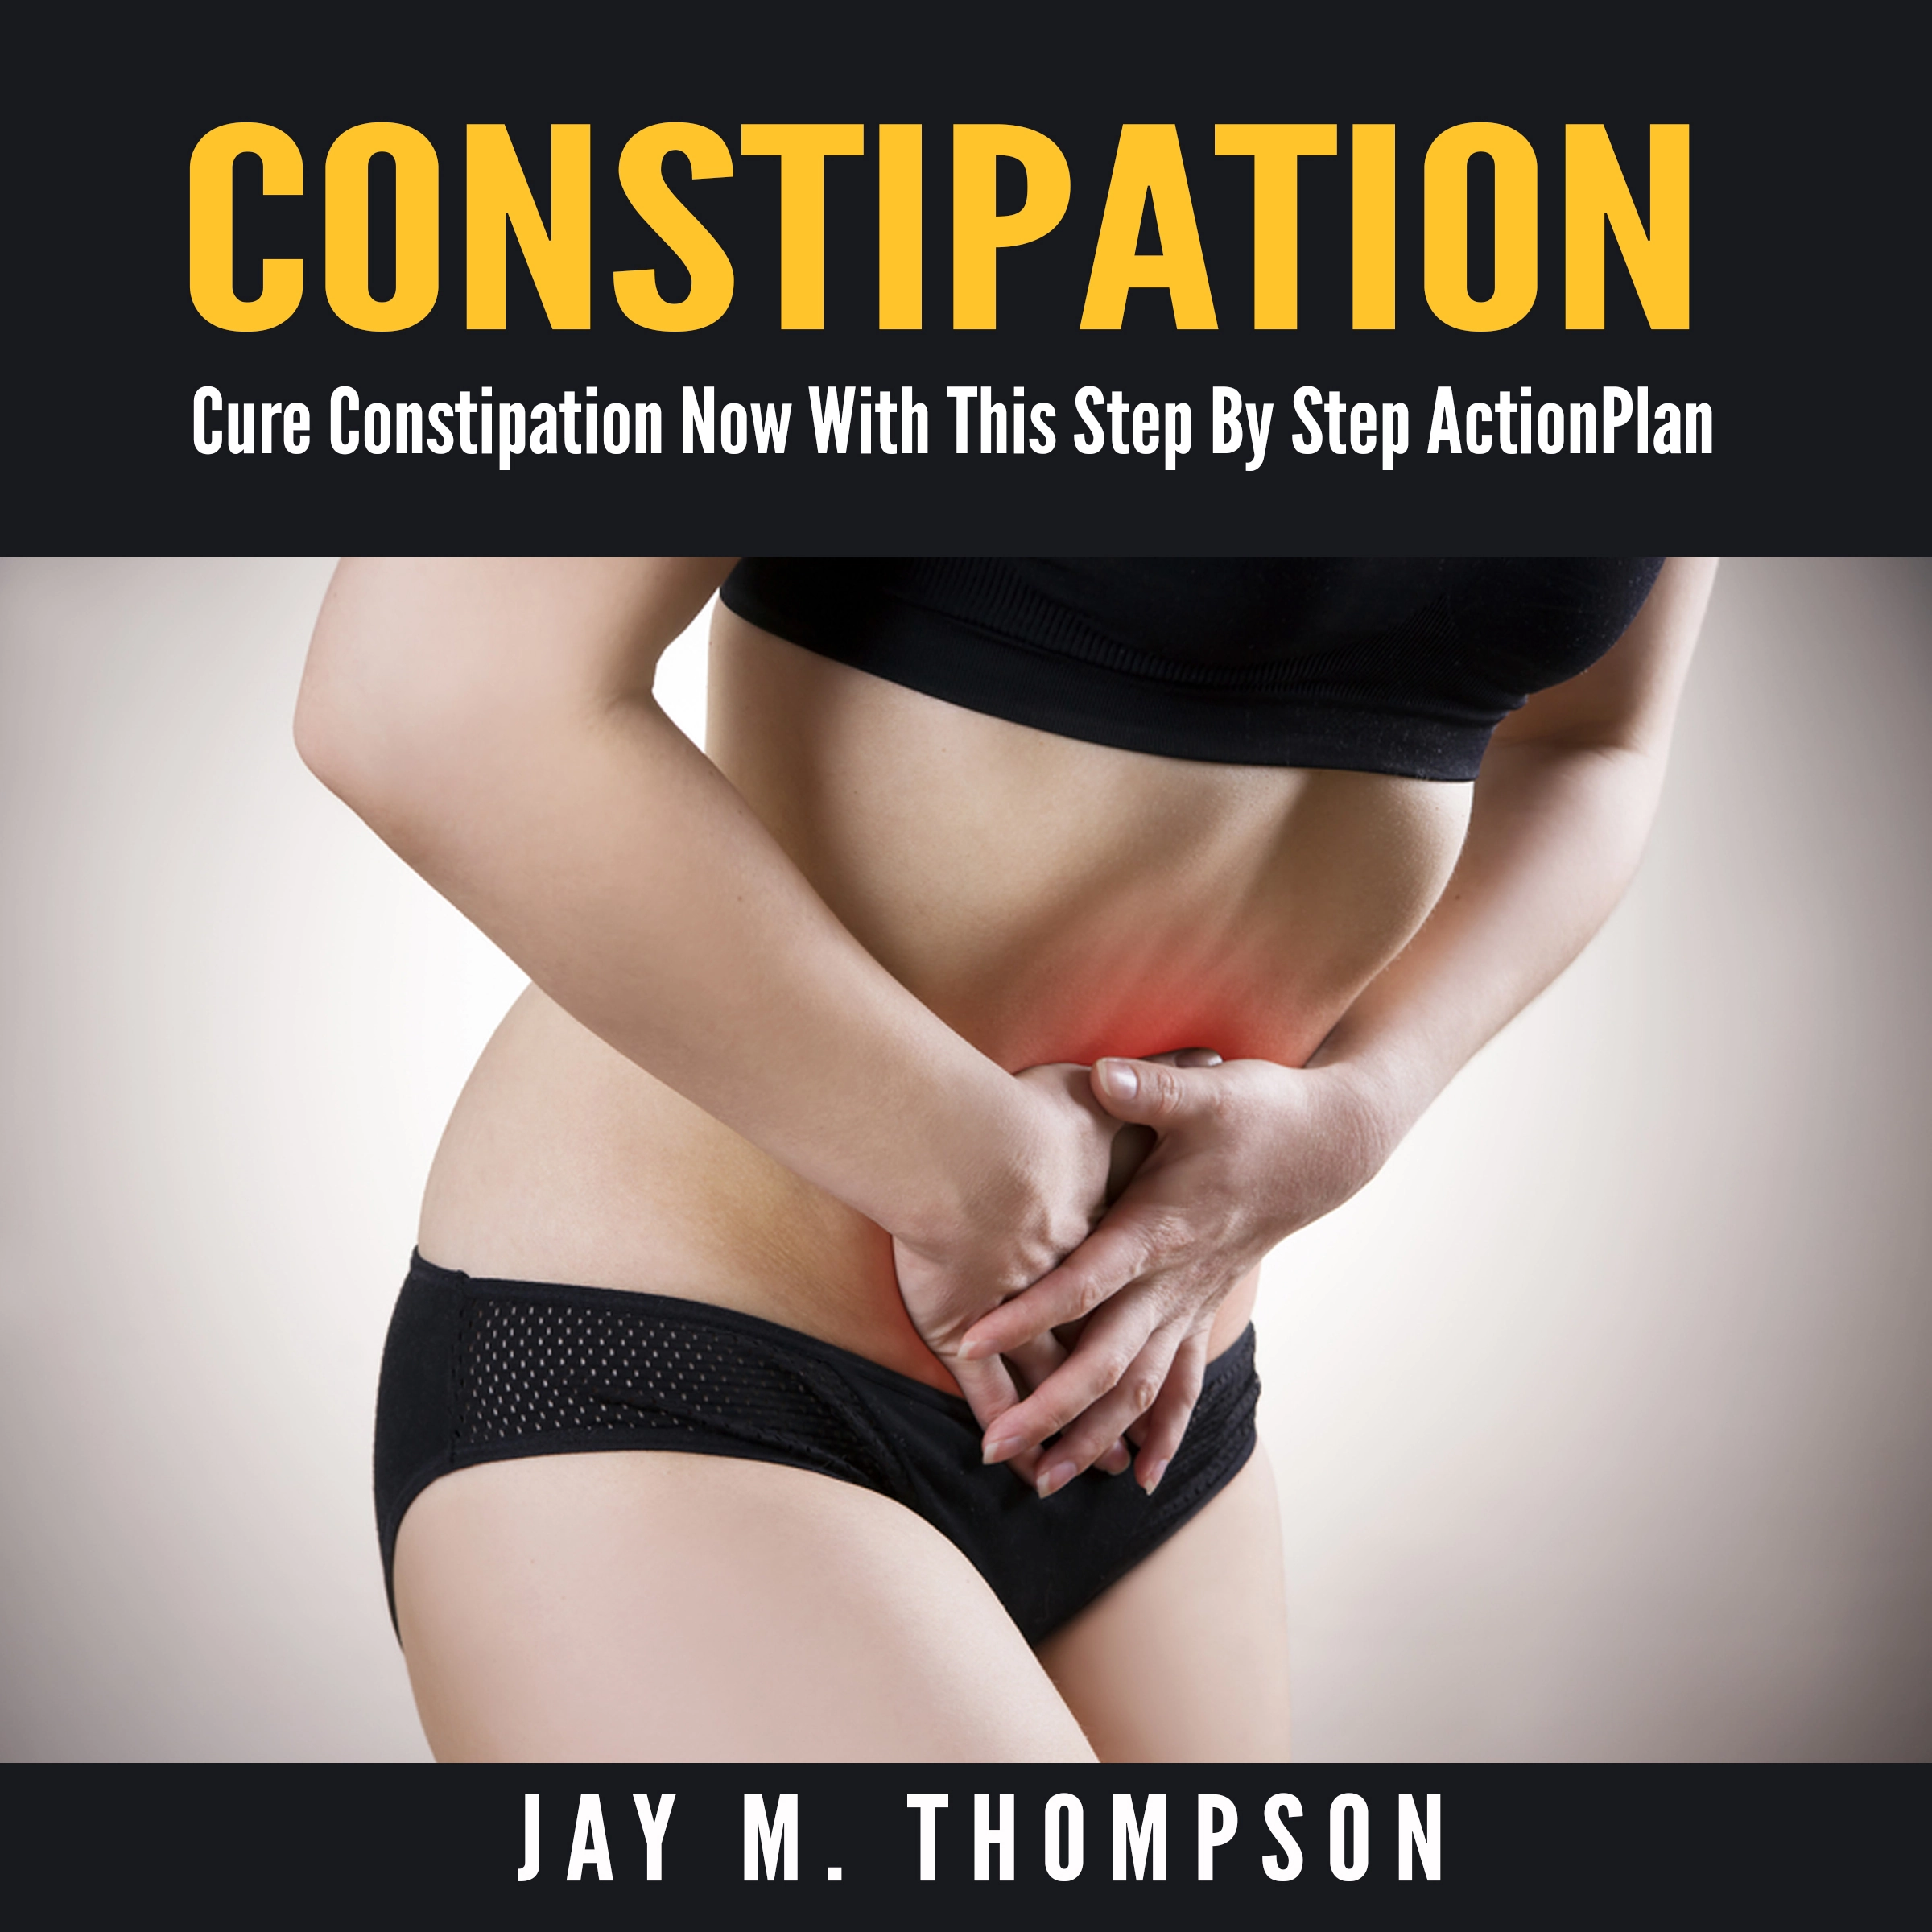 Constipation: Cure Constipation Now With This Step By Step Action Plan Audiobook by Jay M. Thompson